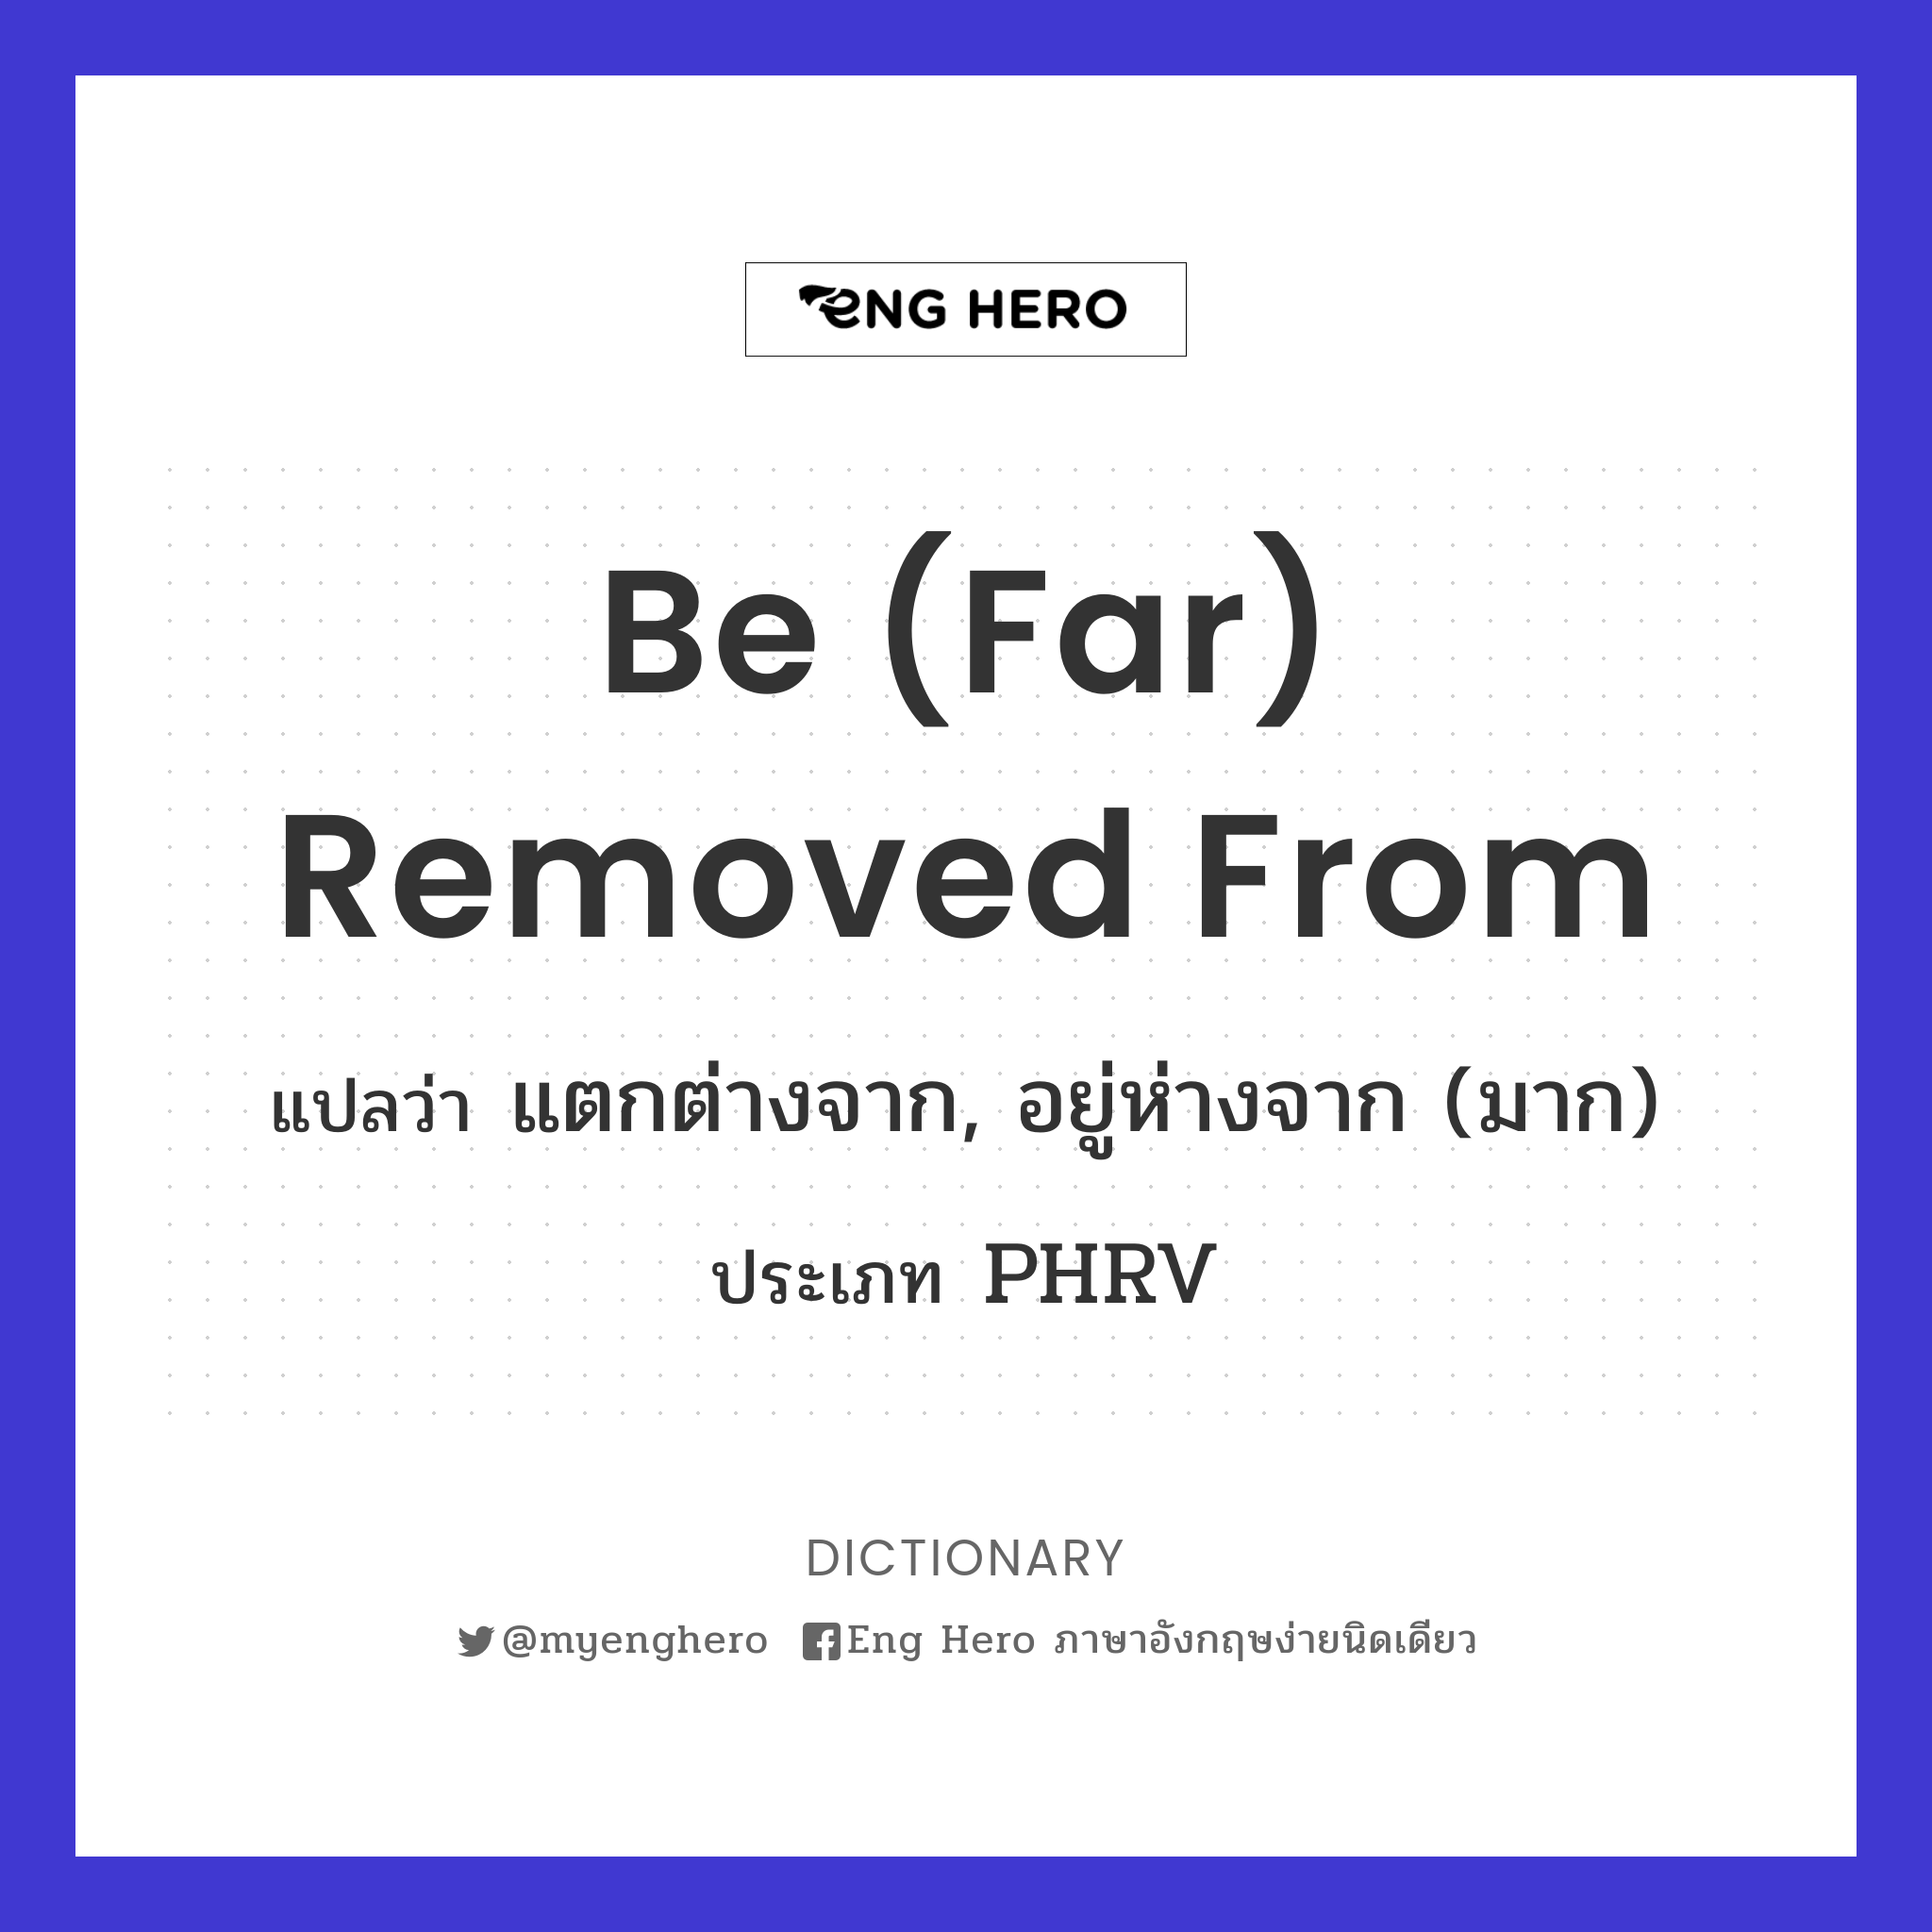 be (far) removed from